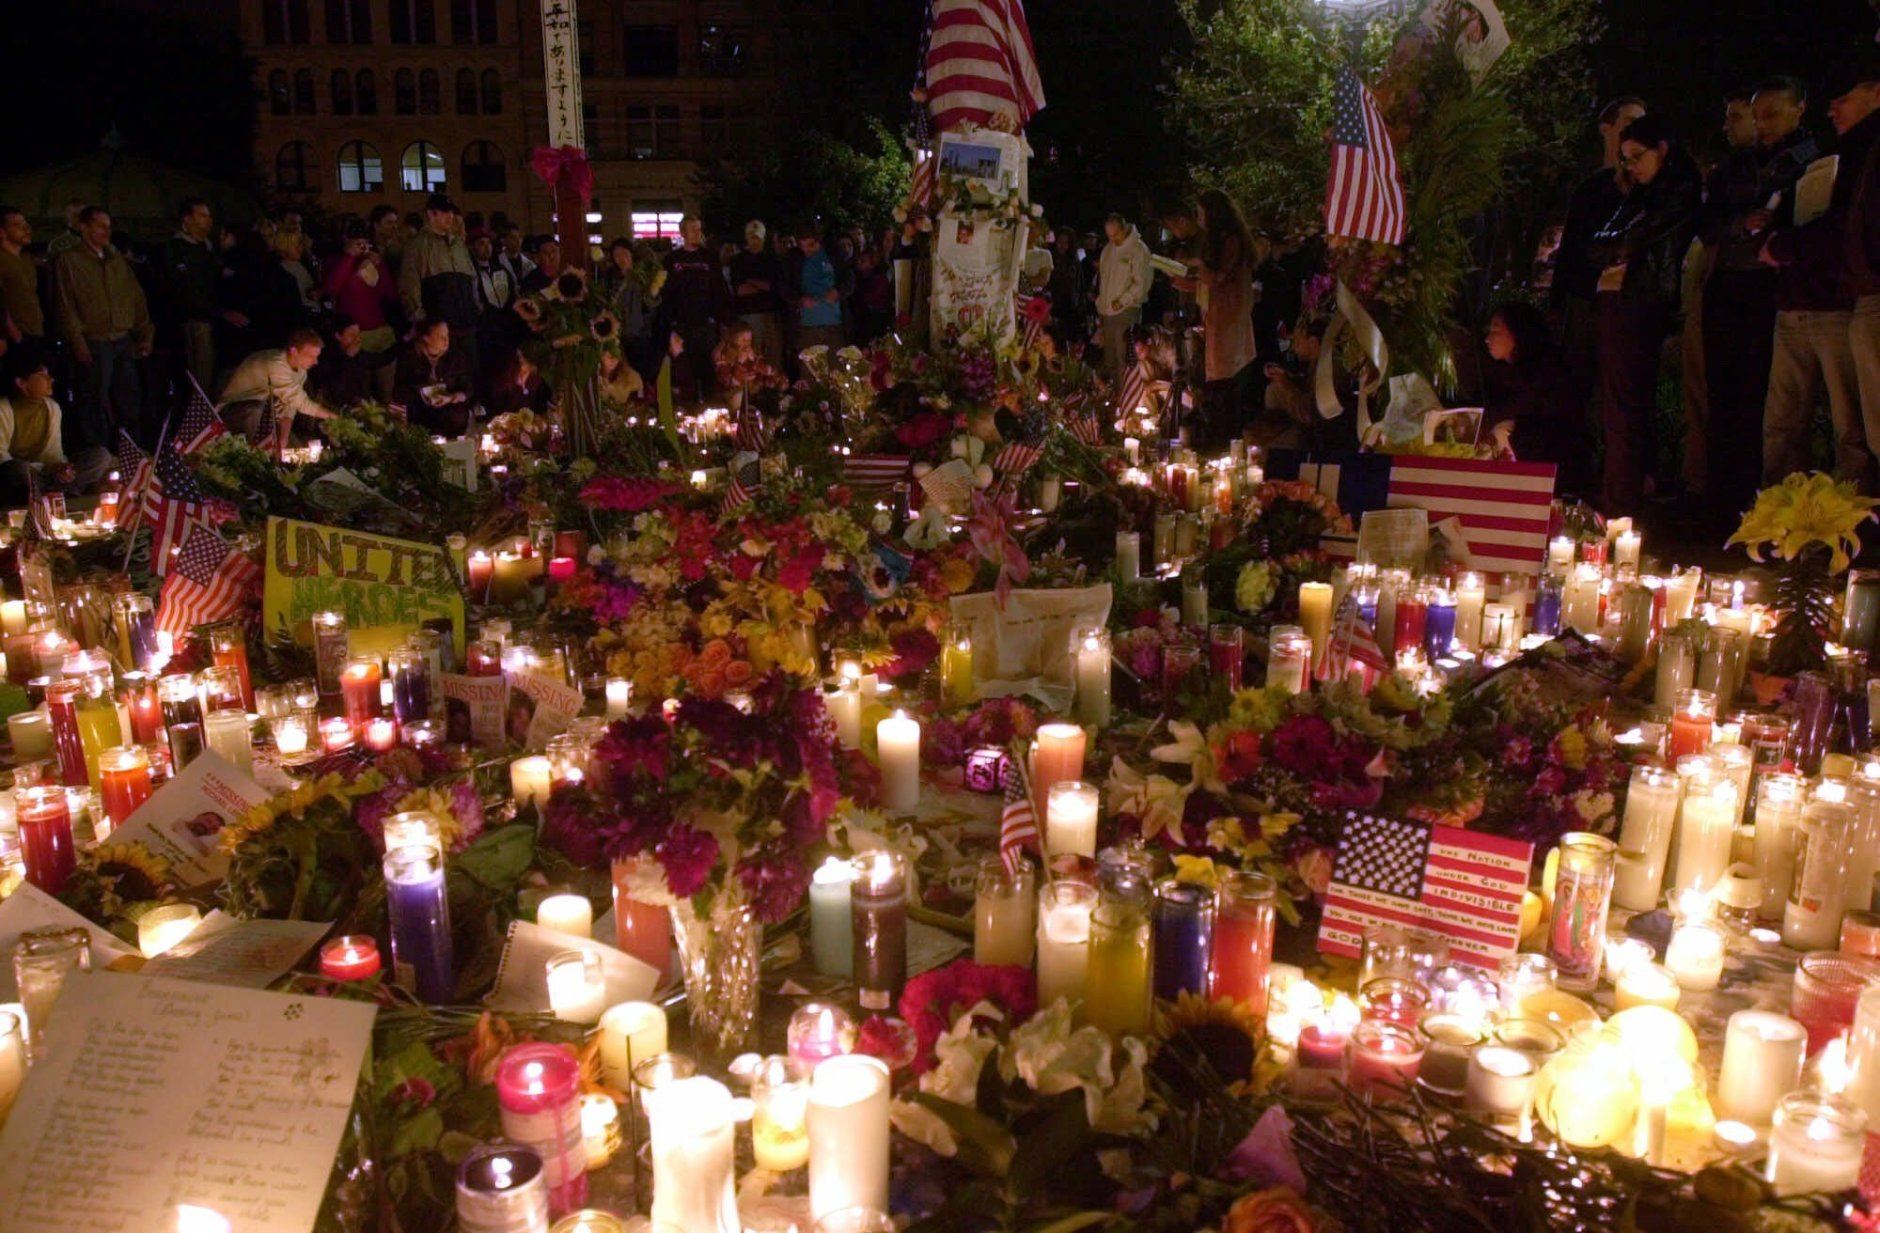 A candlelight vigil and memorial continues early Saturday morning, Sept. 15, 2001 on New York's Union Square, not far from the site of Tuesday's terrorist attack against the World Trade Center. With the area surrounding the World Trade Center still sealed off, Union Square has become a gathering place for people honoring victims of the attack. (AP Photo/Mark Lennihan)